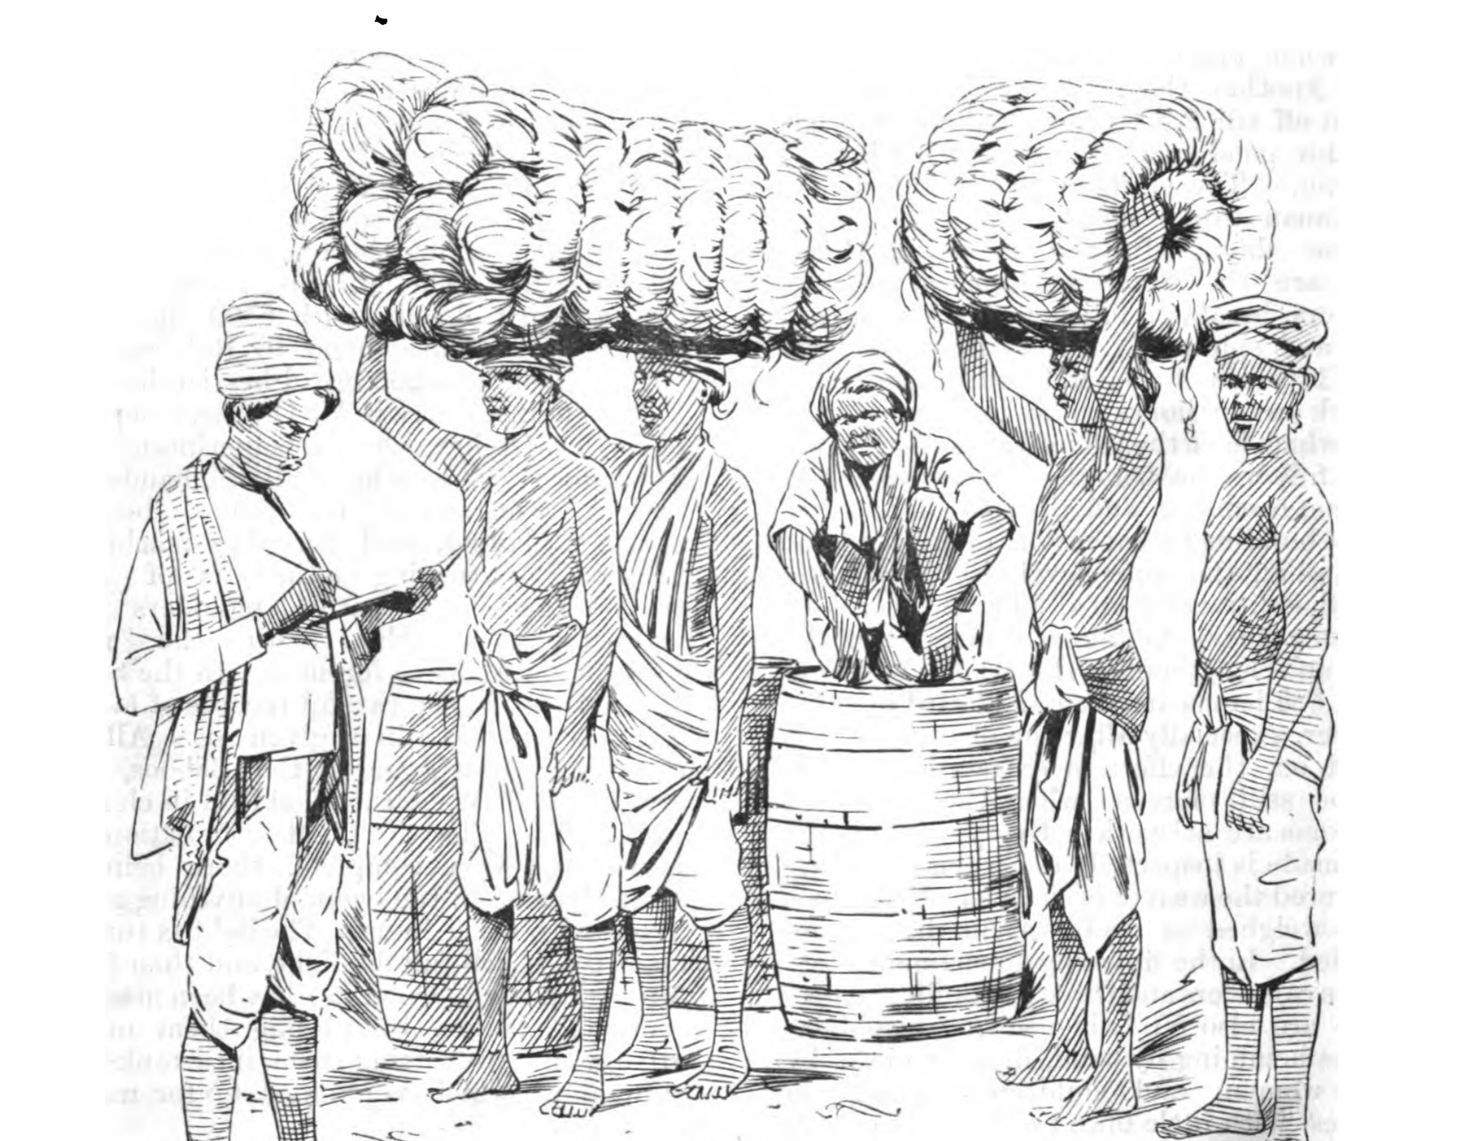 “The Air is Filled with the Stink of Jute”: Teaching South Asia’s Nineteenth-Century Production Revolution